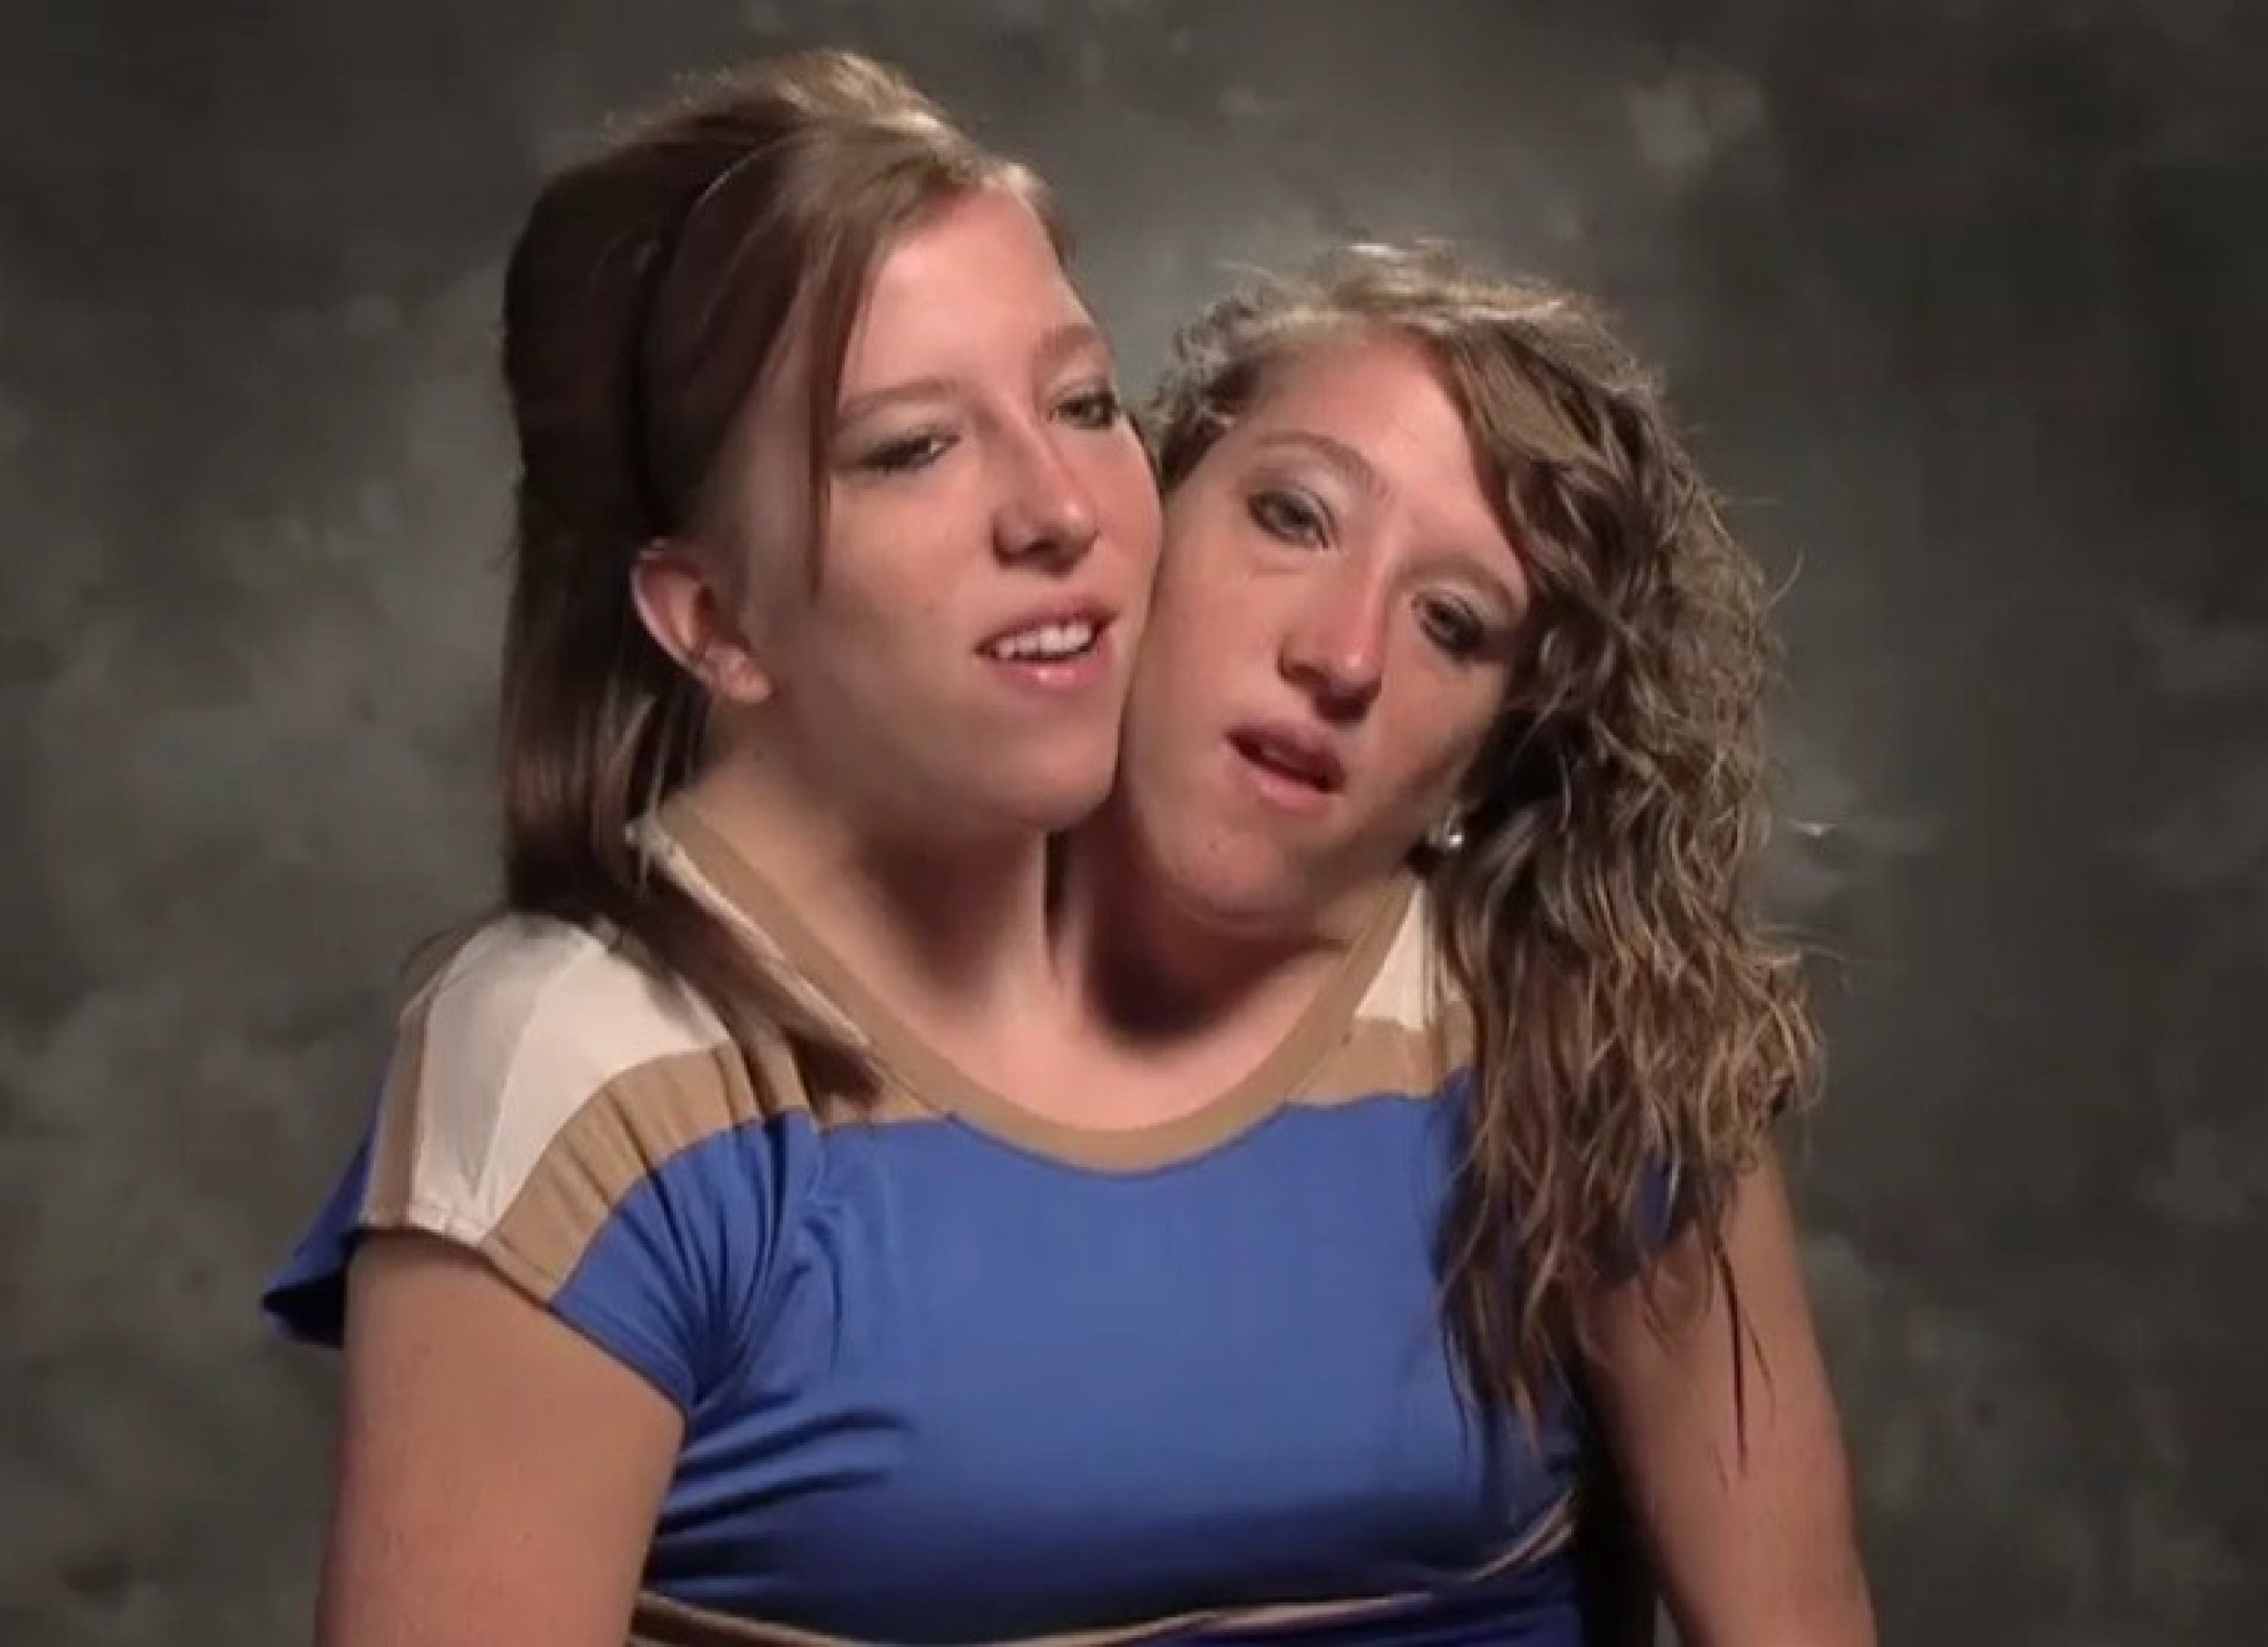 Conjoined Twins Abby and Brittany Hensel Star In New TLC Show; 'Abby